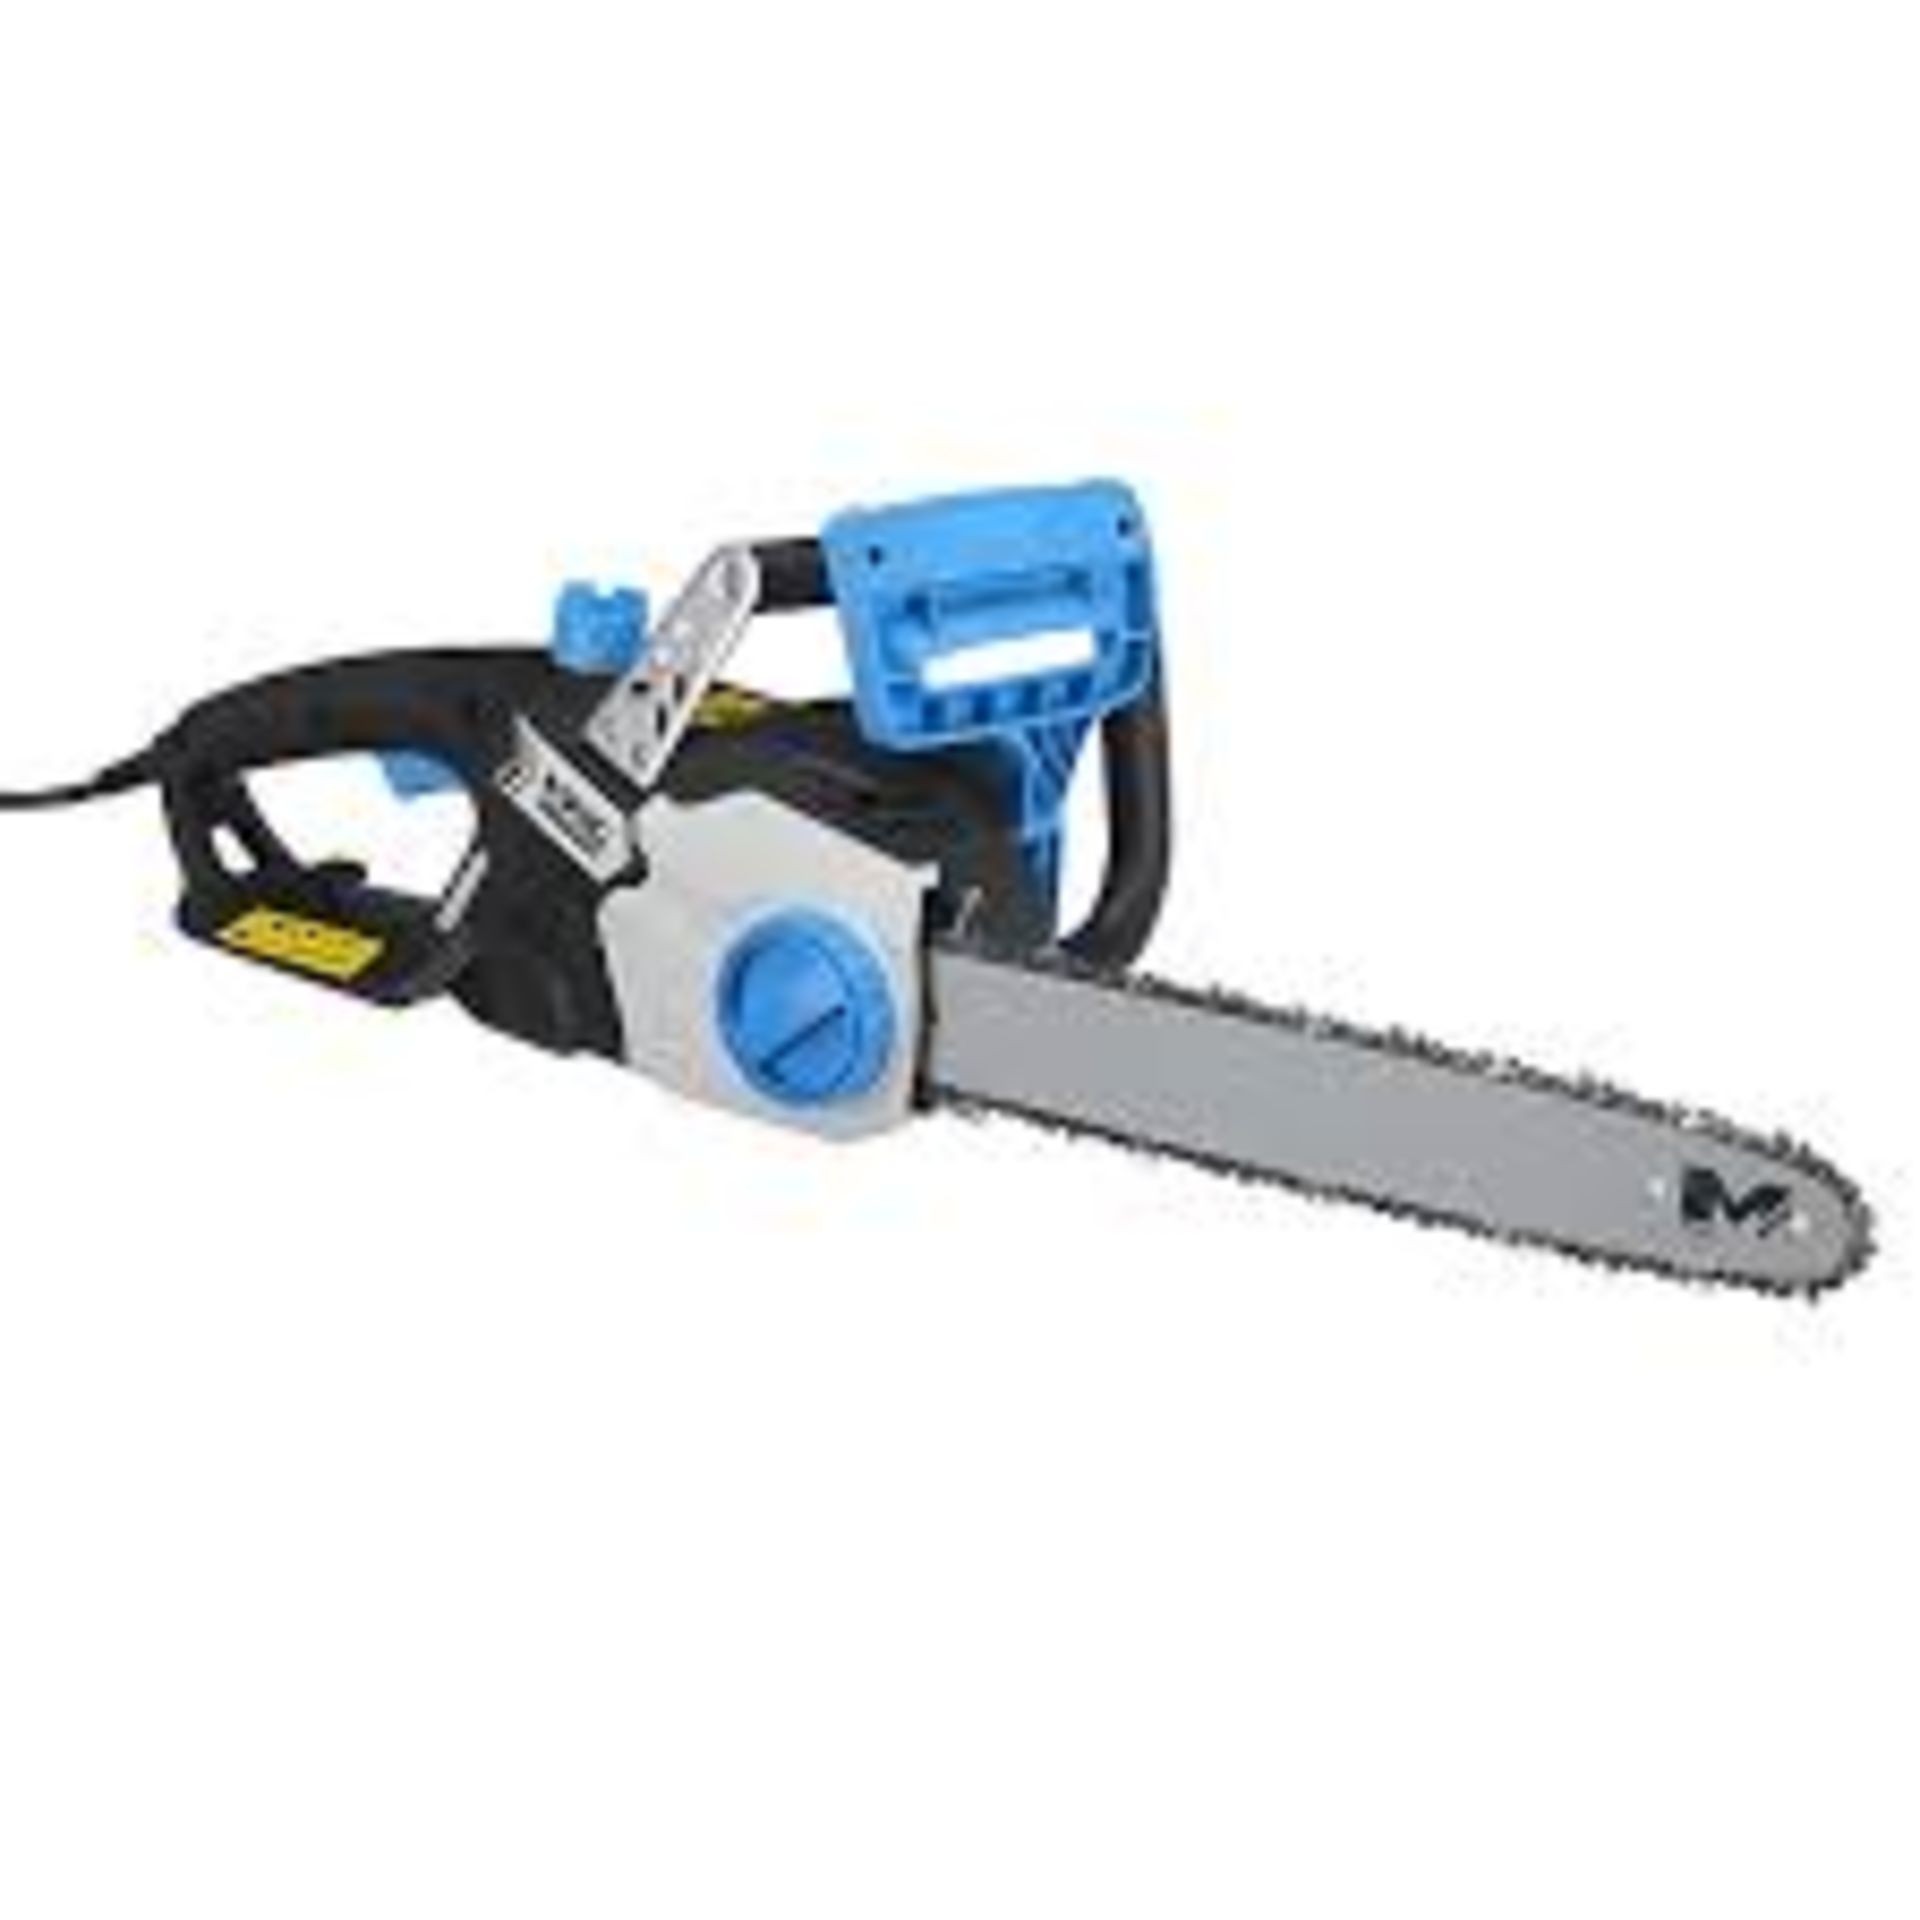 Mac Allister CSWP2000S-2 2000W 220-240V Corded 400mm Chainsaw . - P5